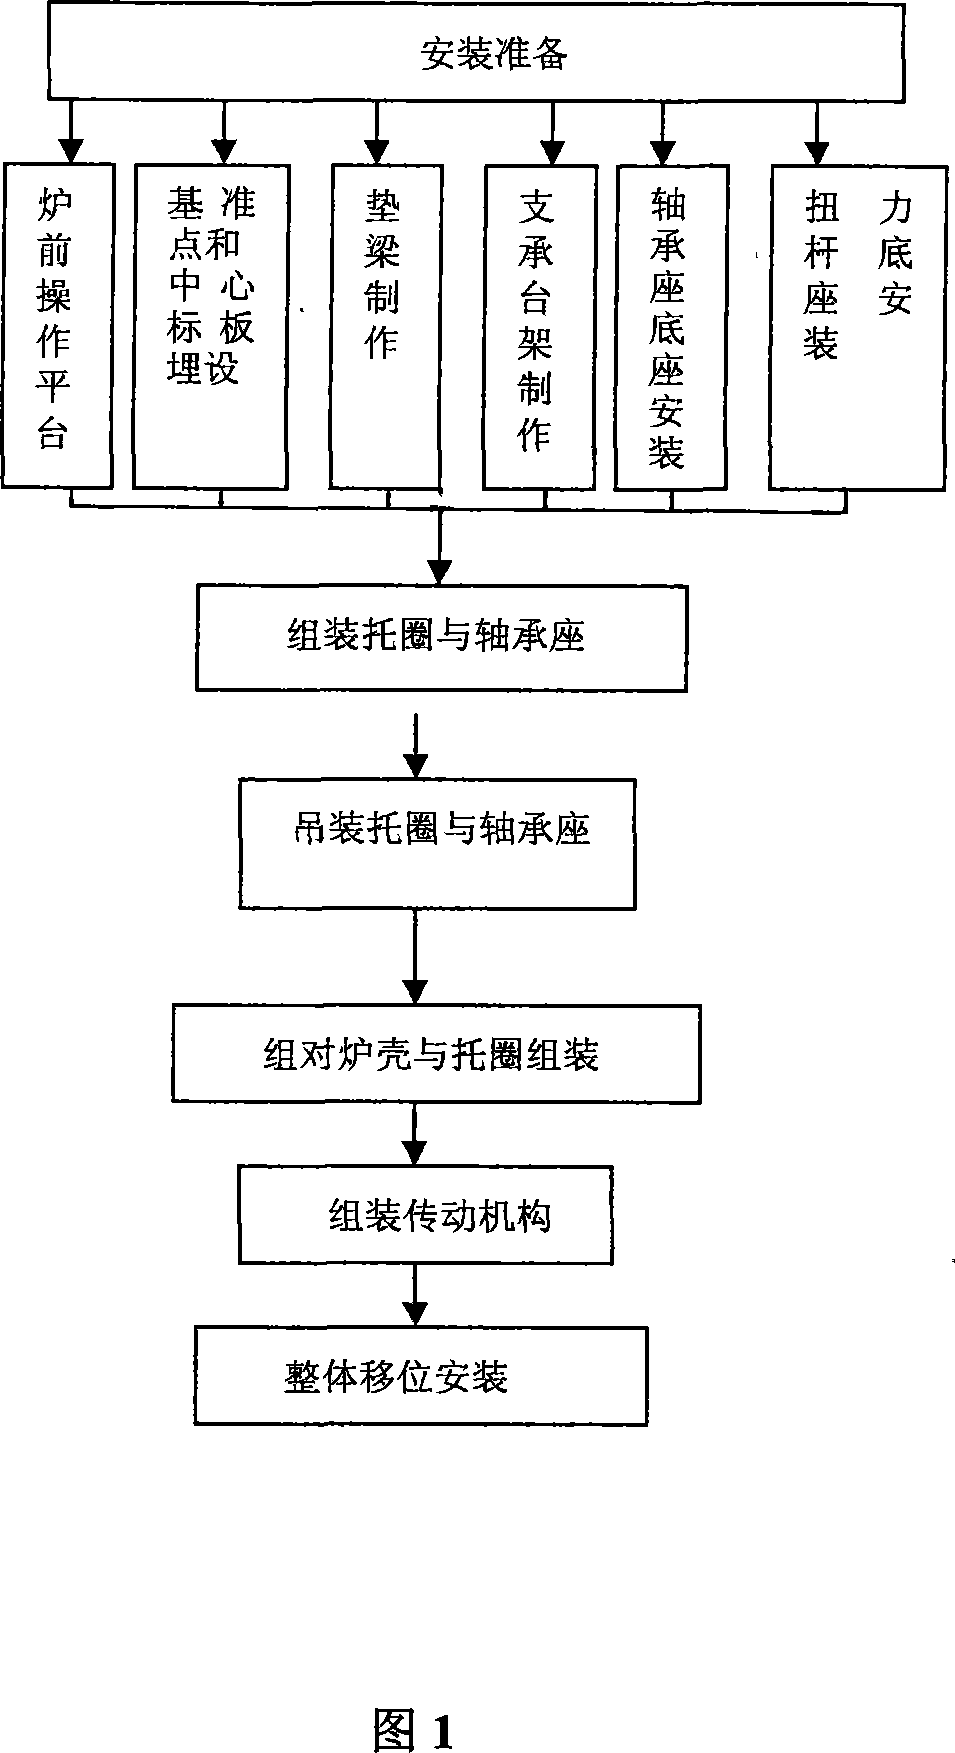 Combination method mounting technique for ultra-large type steel converter